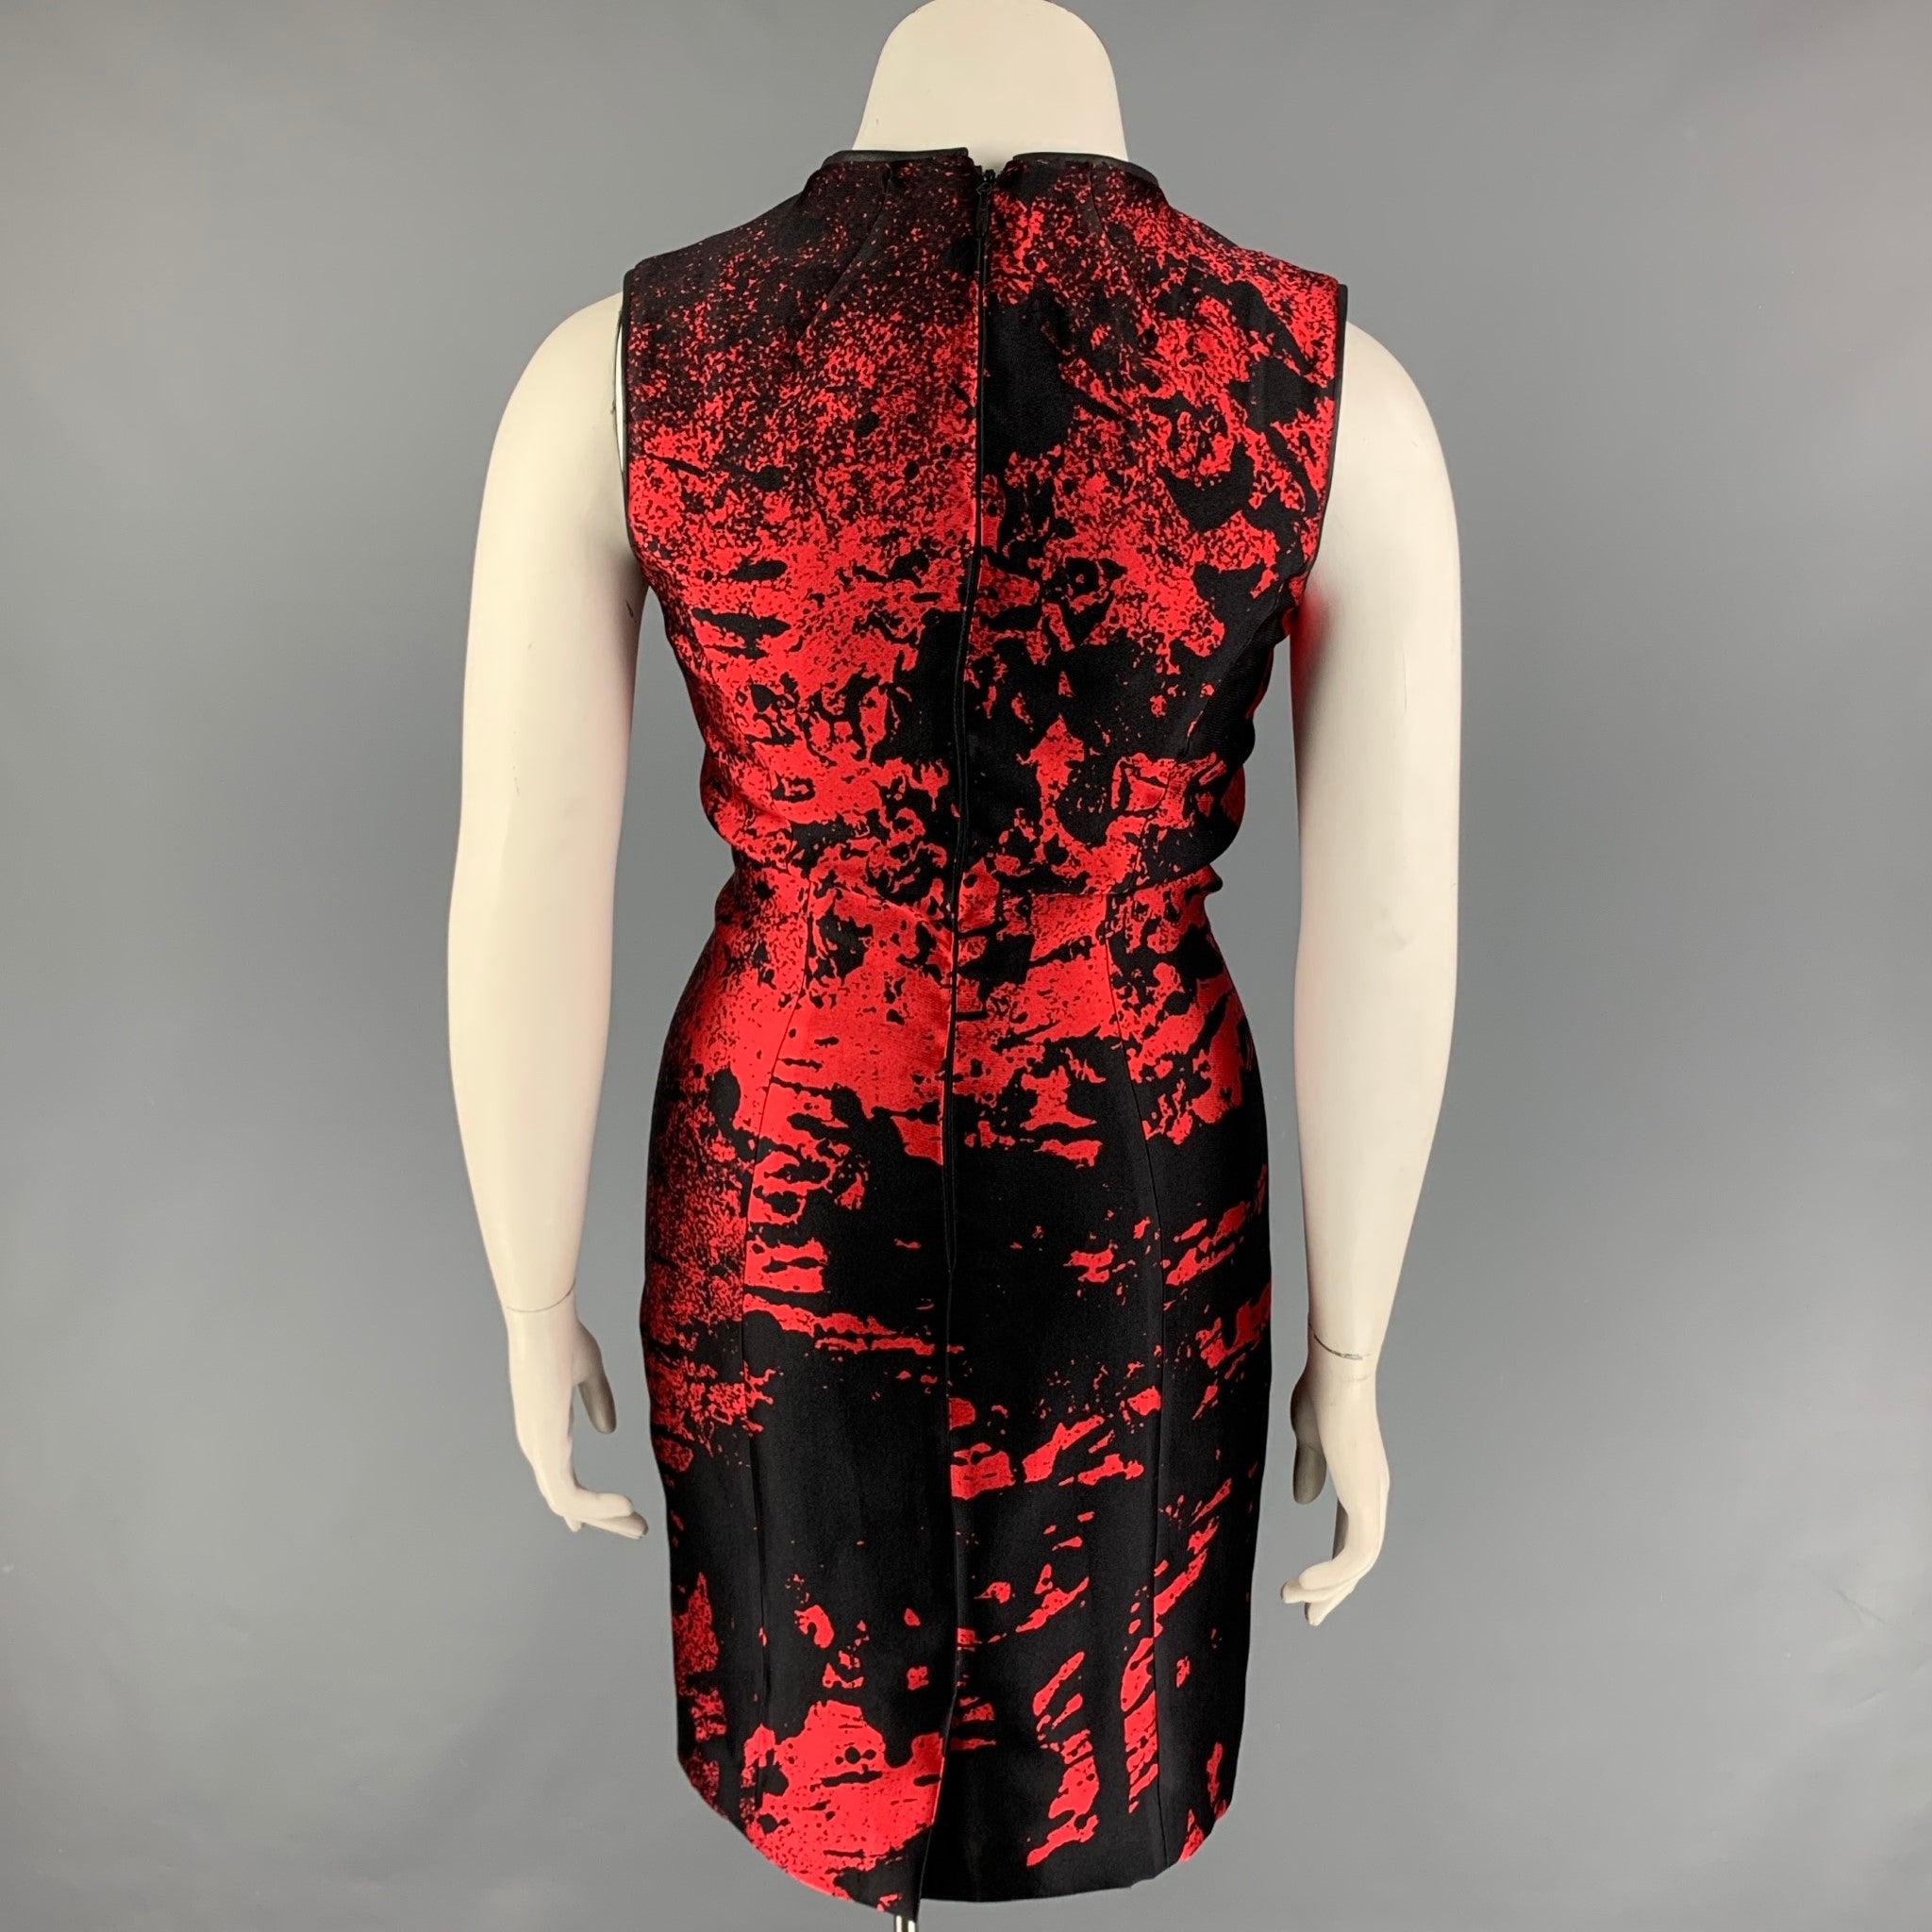 MONIQUE LHUILLIER Size 10 Red Black Wool Lycra Abstract Sheath Dress In Good Condition For Sale In San Francisco, CA